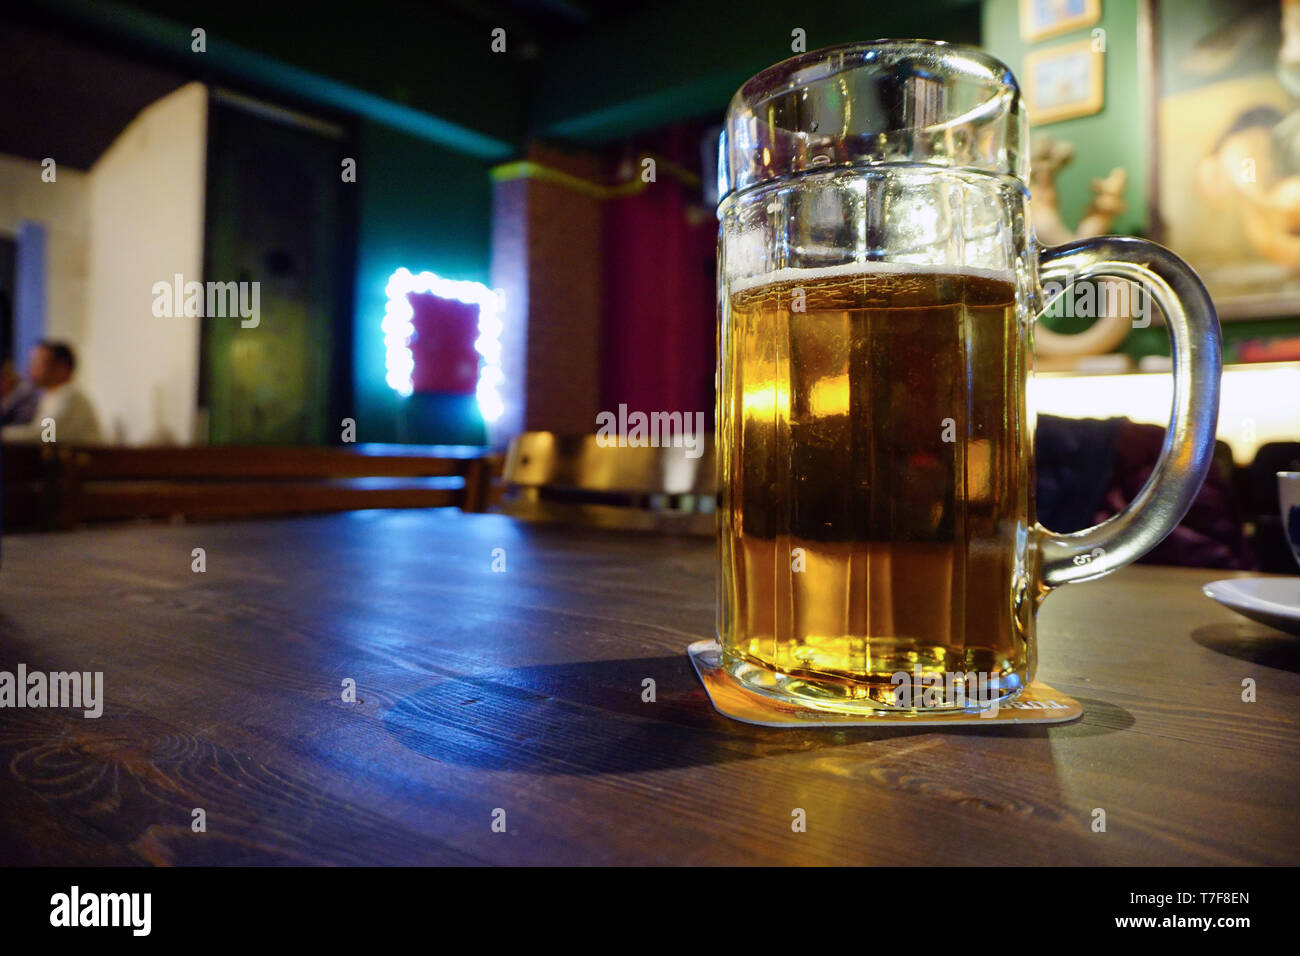 Big pint of beer on wooden table close up view Stock Photo - Alamy